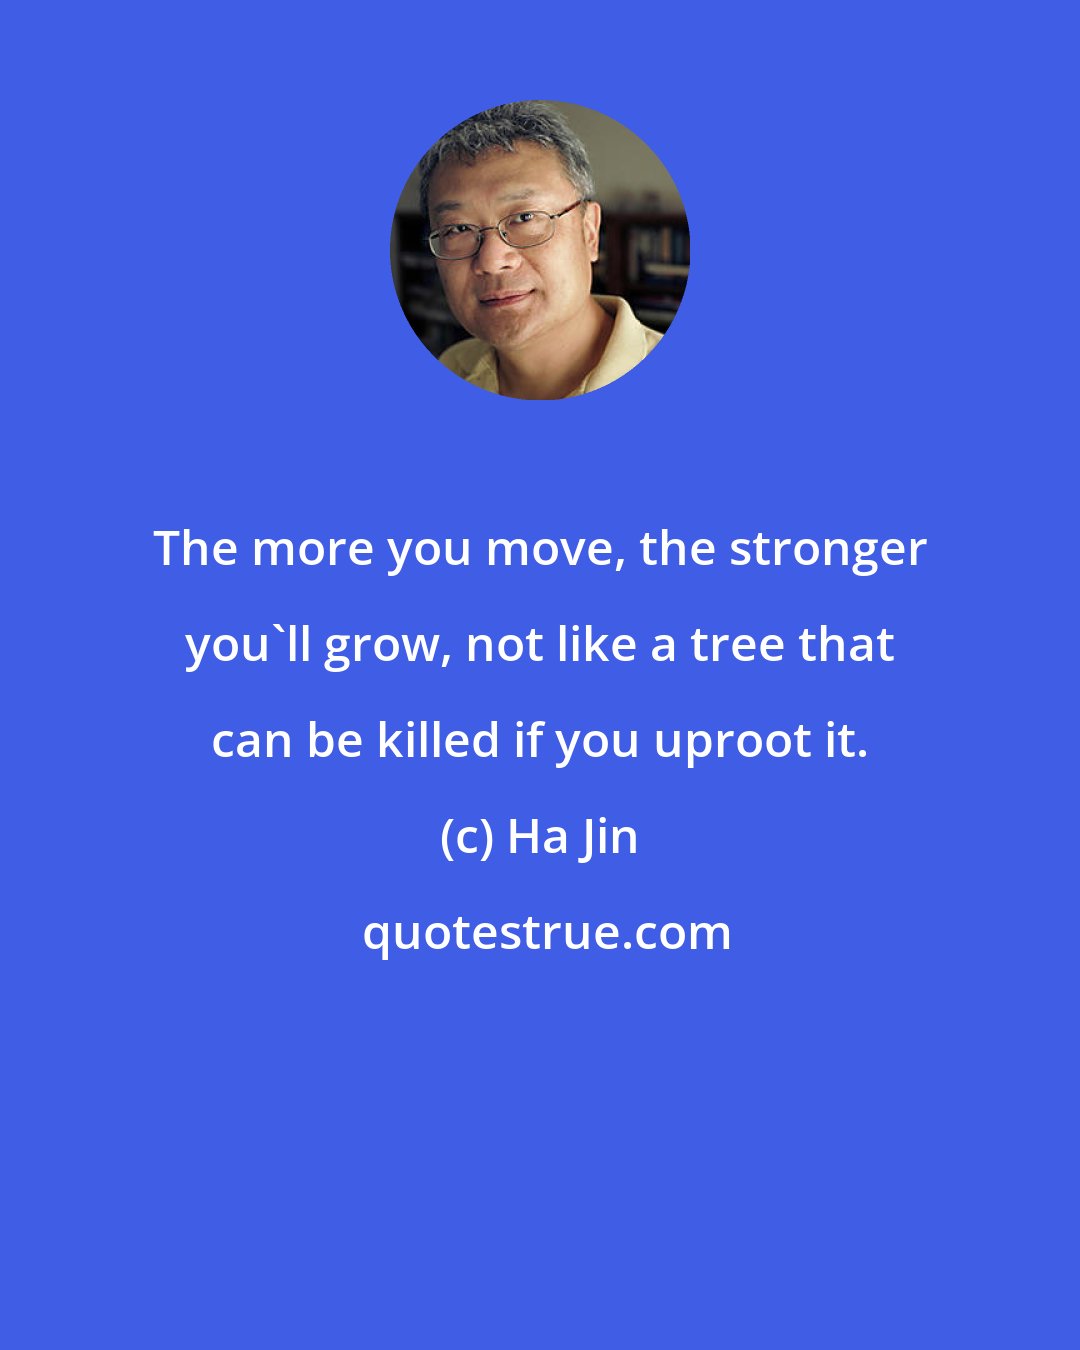 Ha Jin: The more you move, the stronger you'll grow, not like a tree that can be killed if you uproot it.